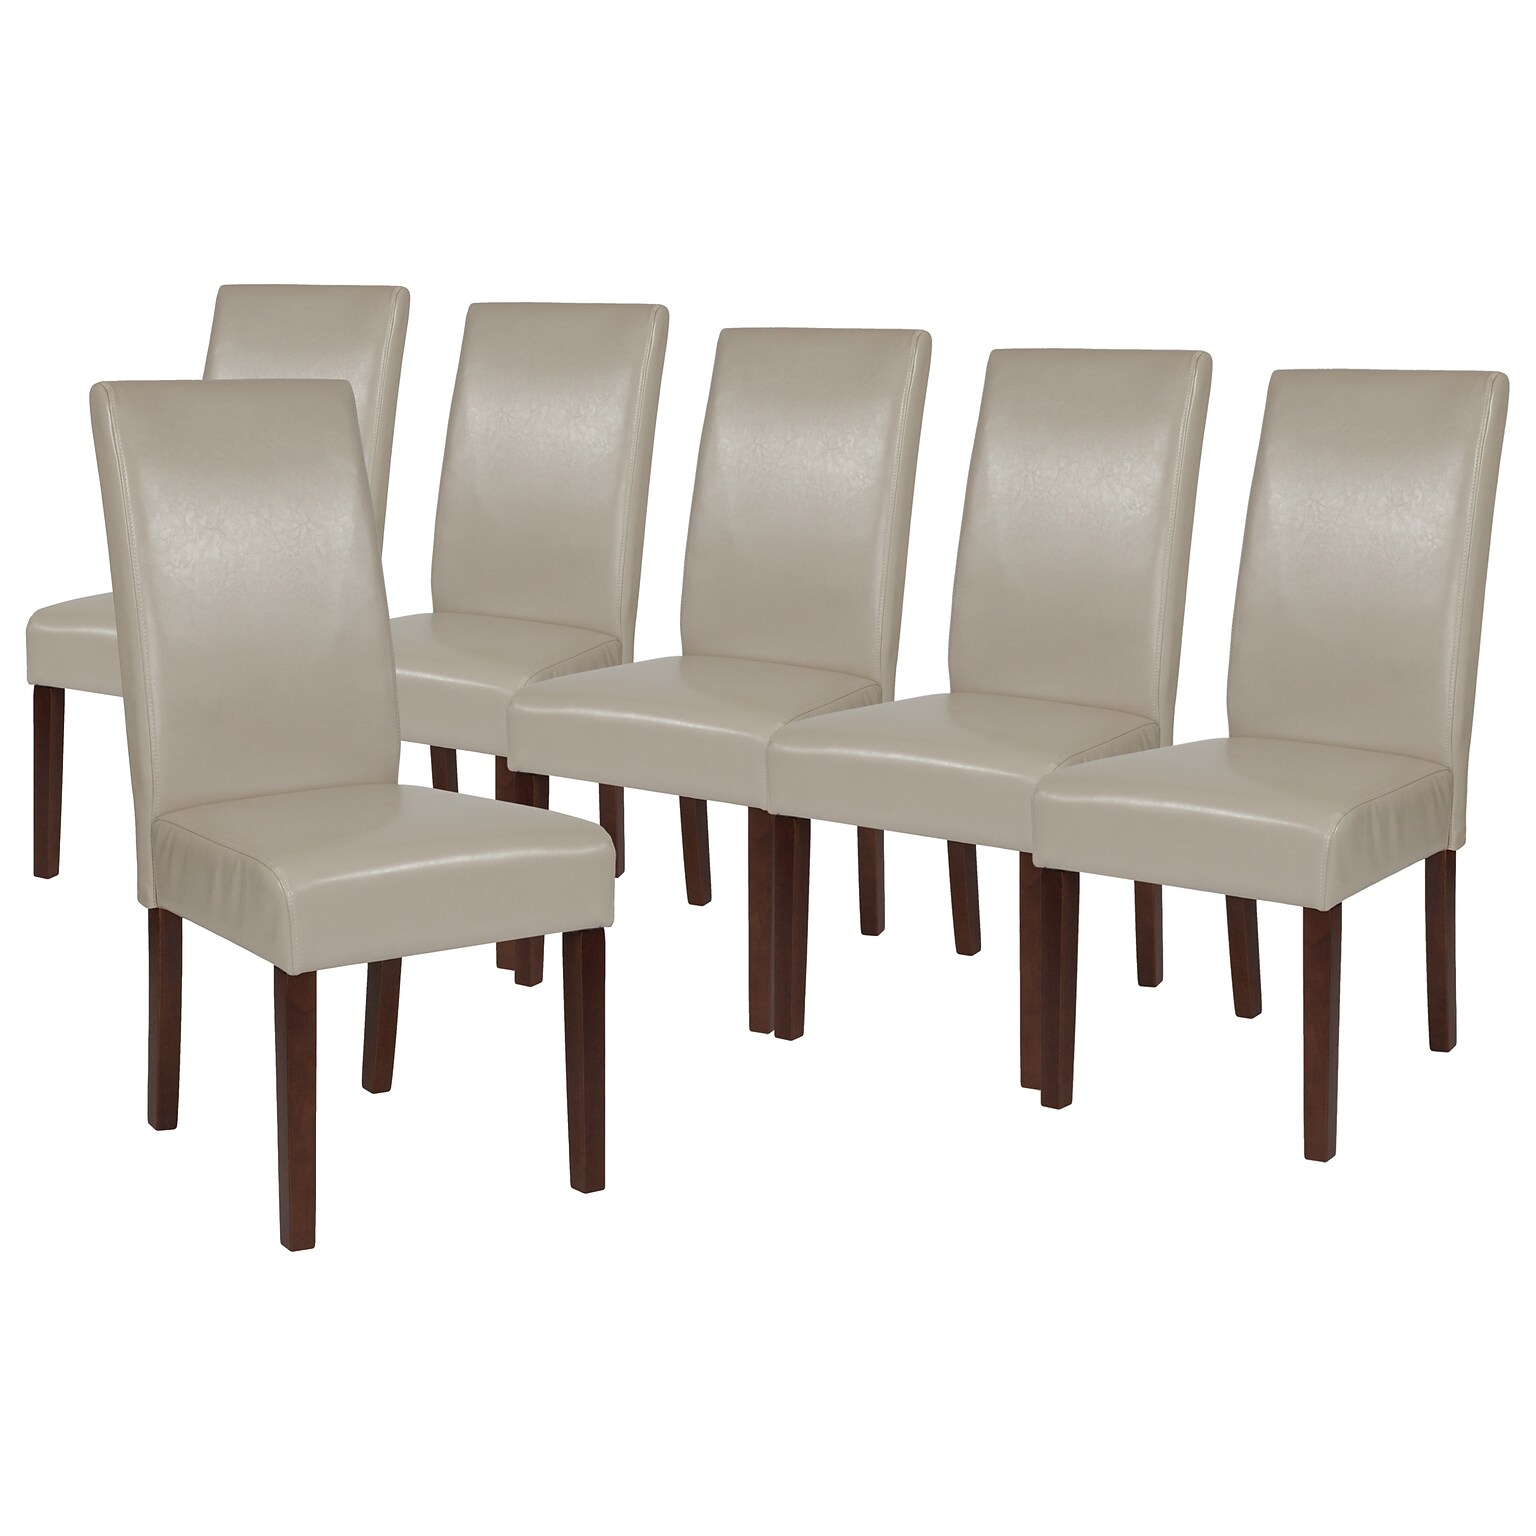 Flash Furniture Greenwich Series Midcentury LeatherSoft Parsons Dining Chair, Beige, 6/Pack (6QYA379061BGL)